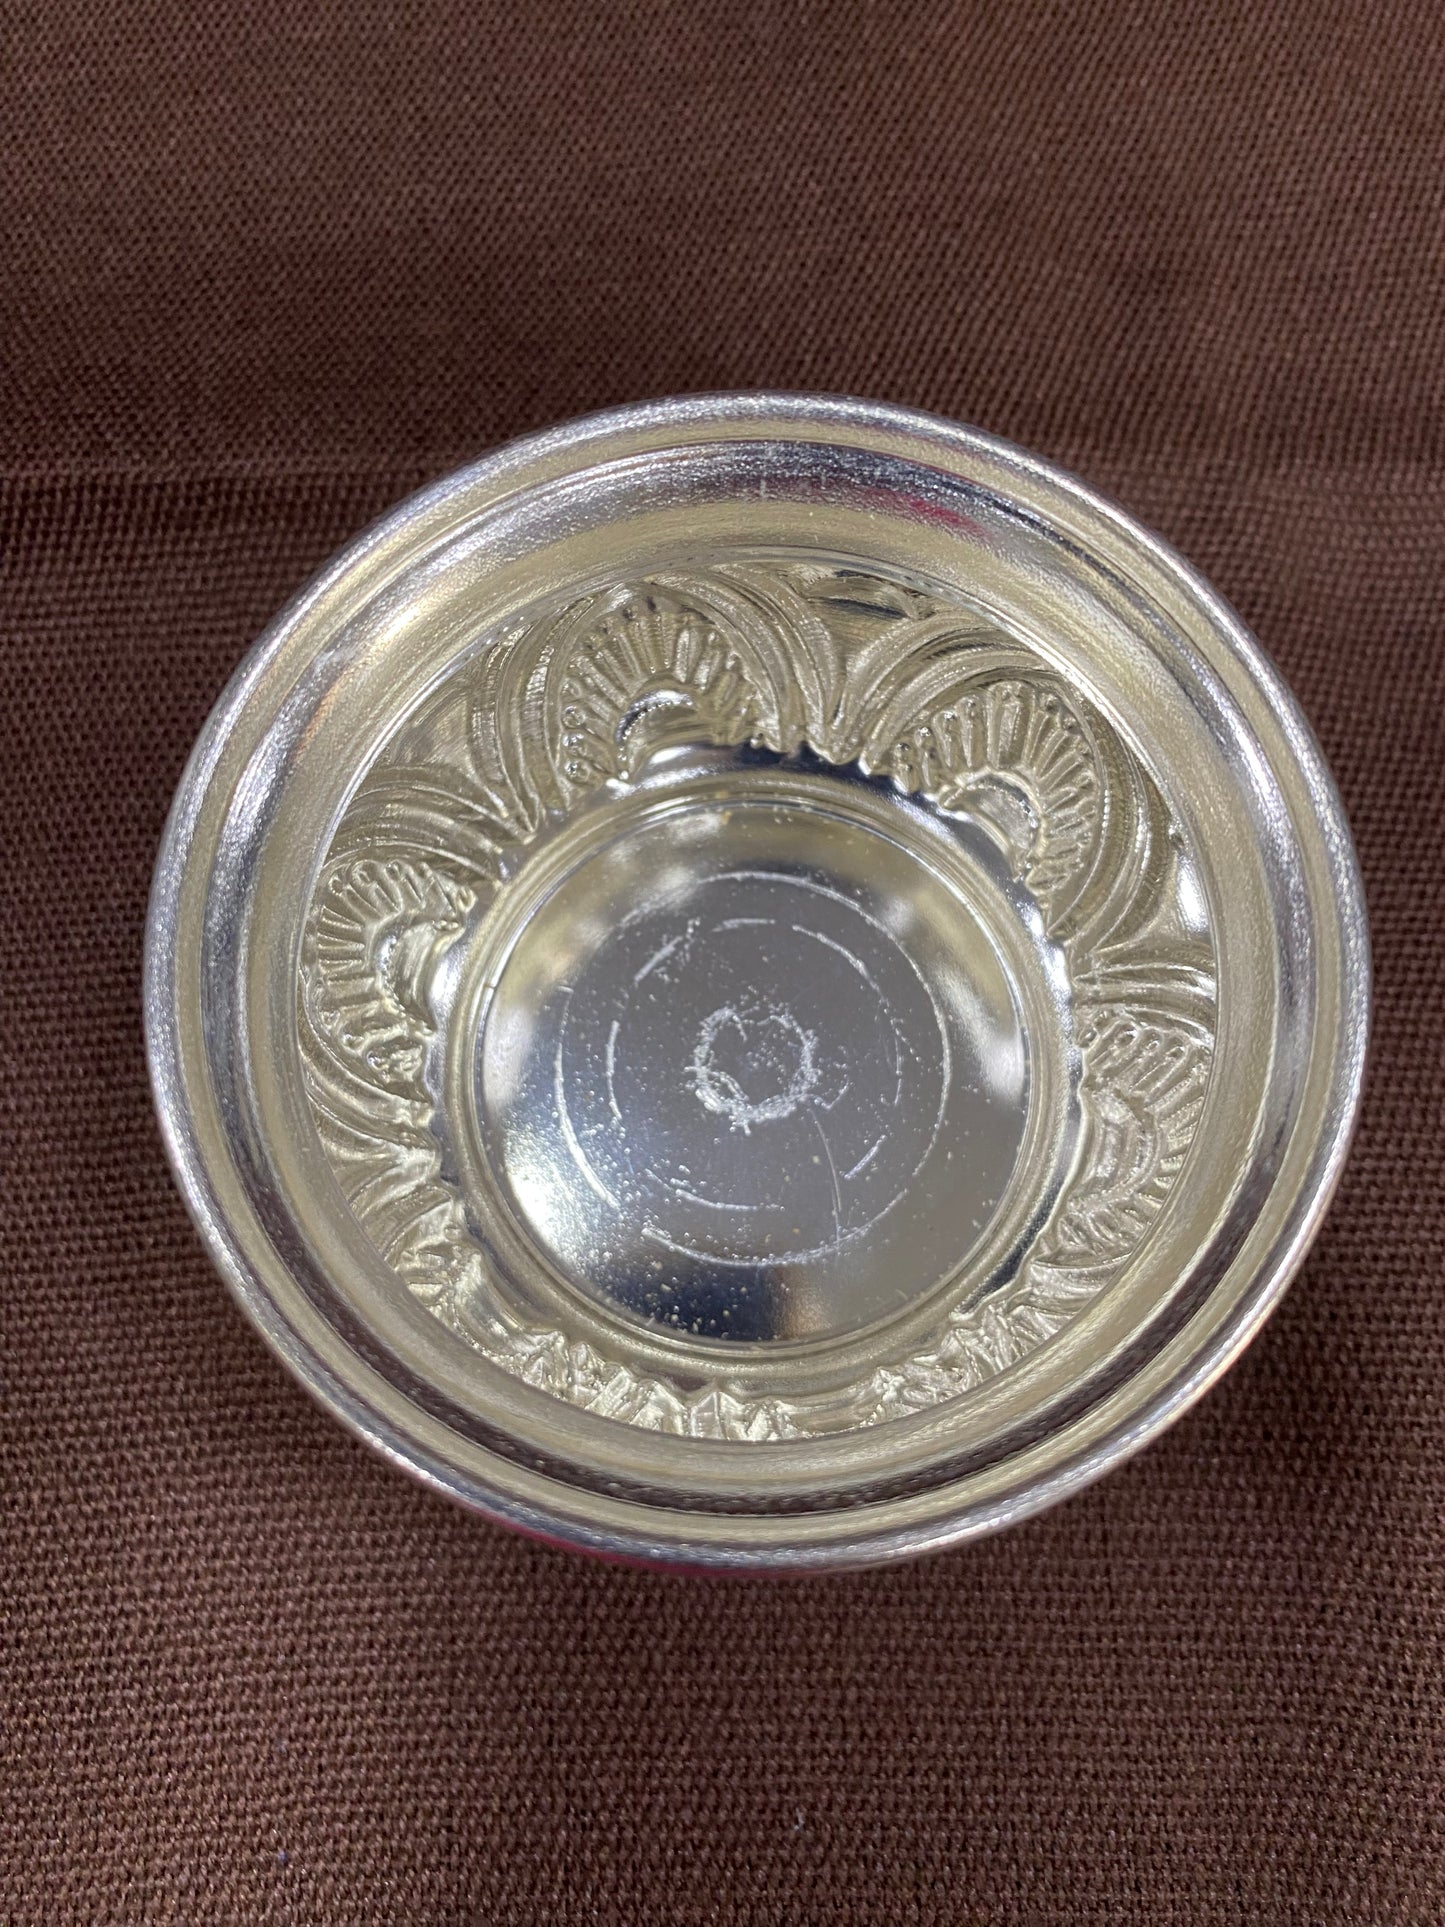 sriman german silver cup height is 2